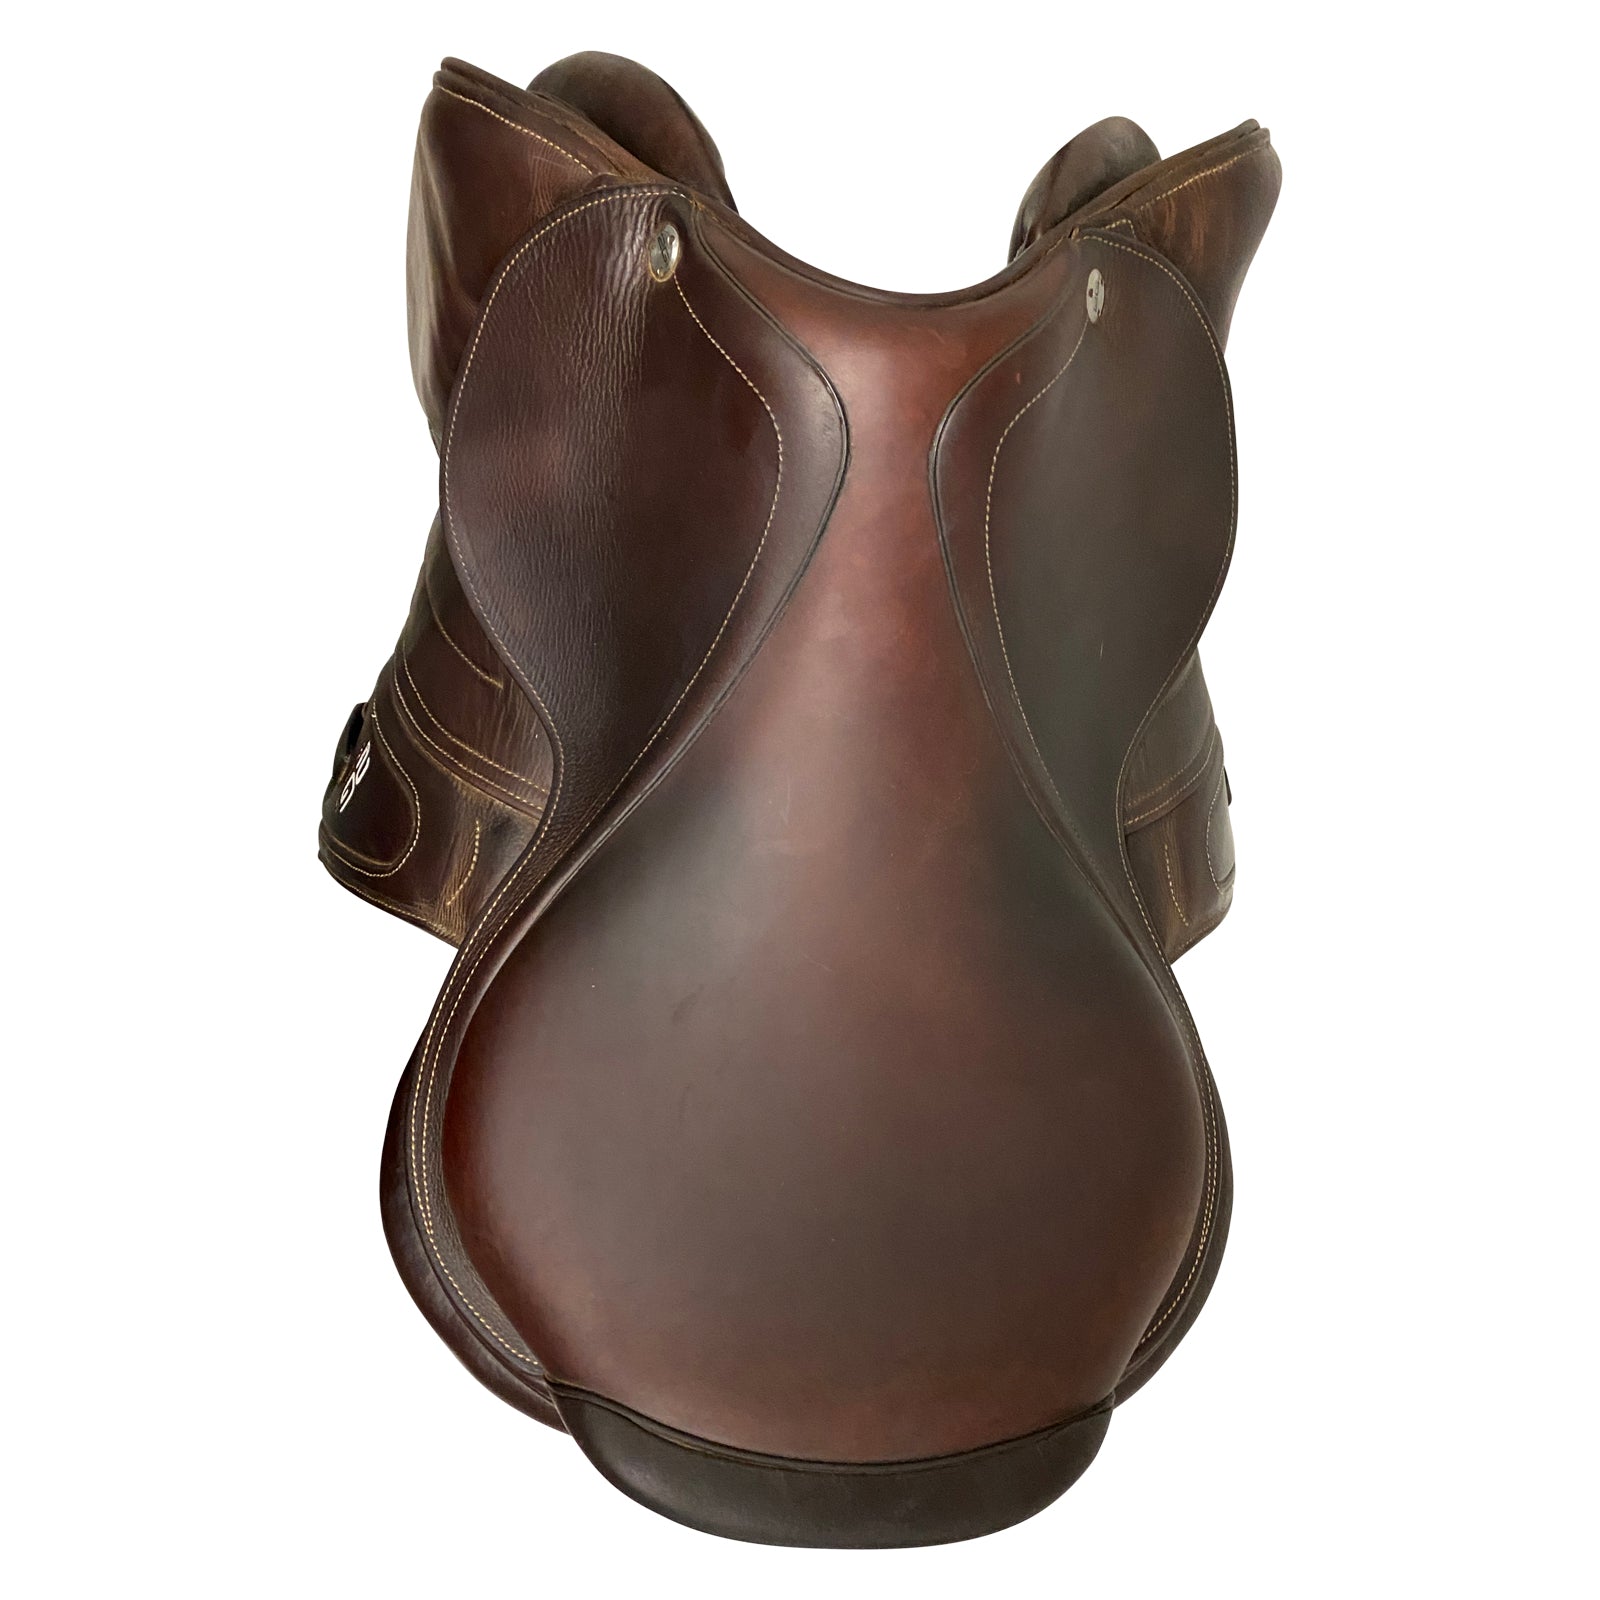 Top view of CWD 2015 SE30 2Gs Saddle in Brown